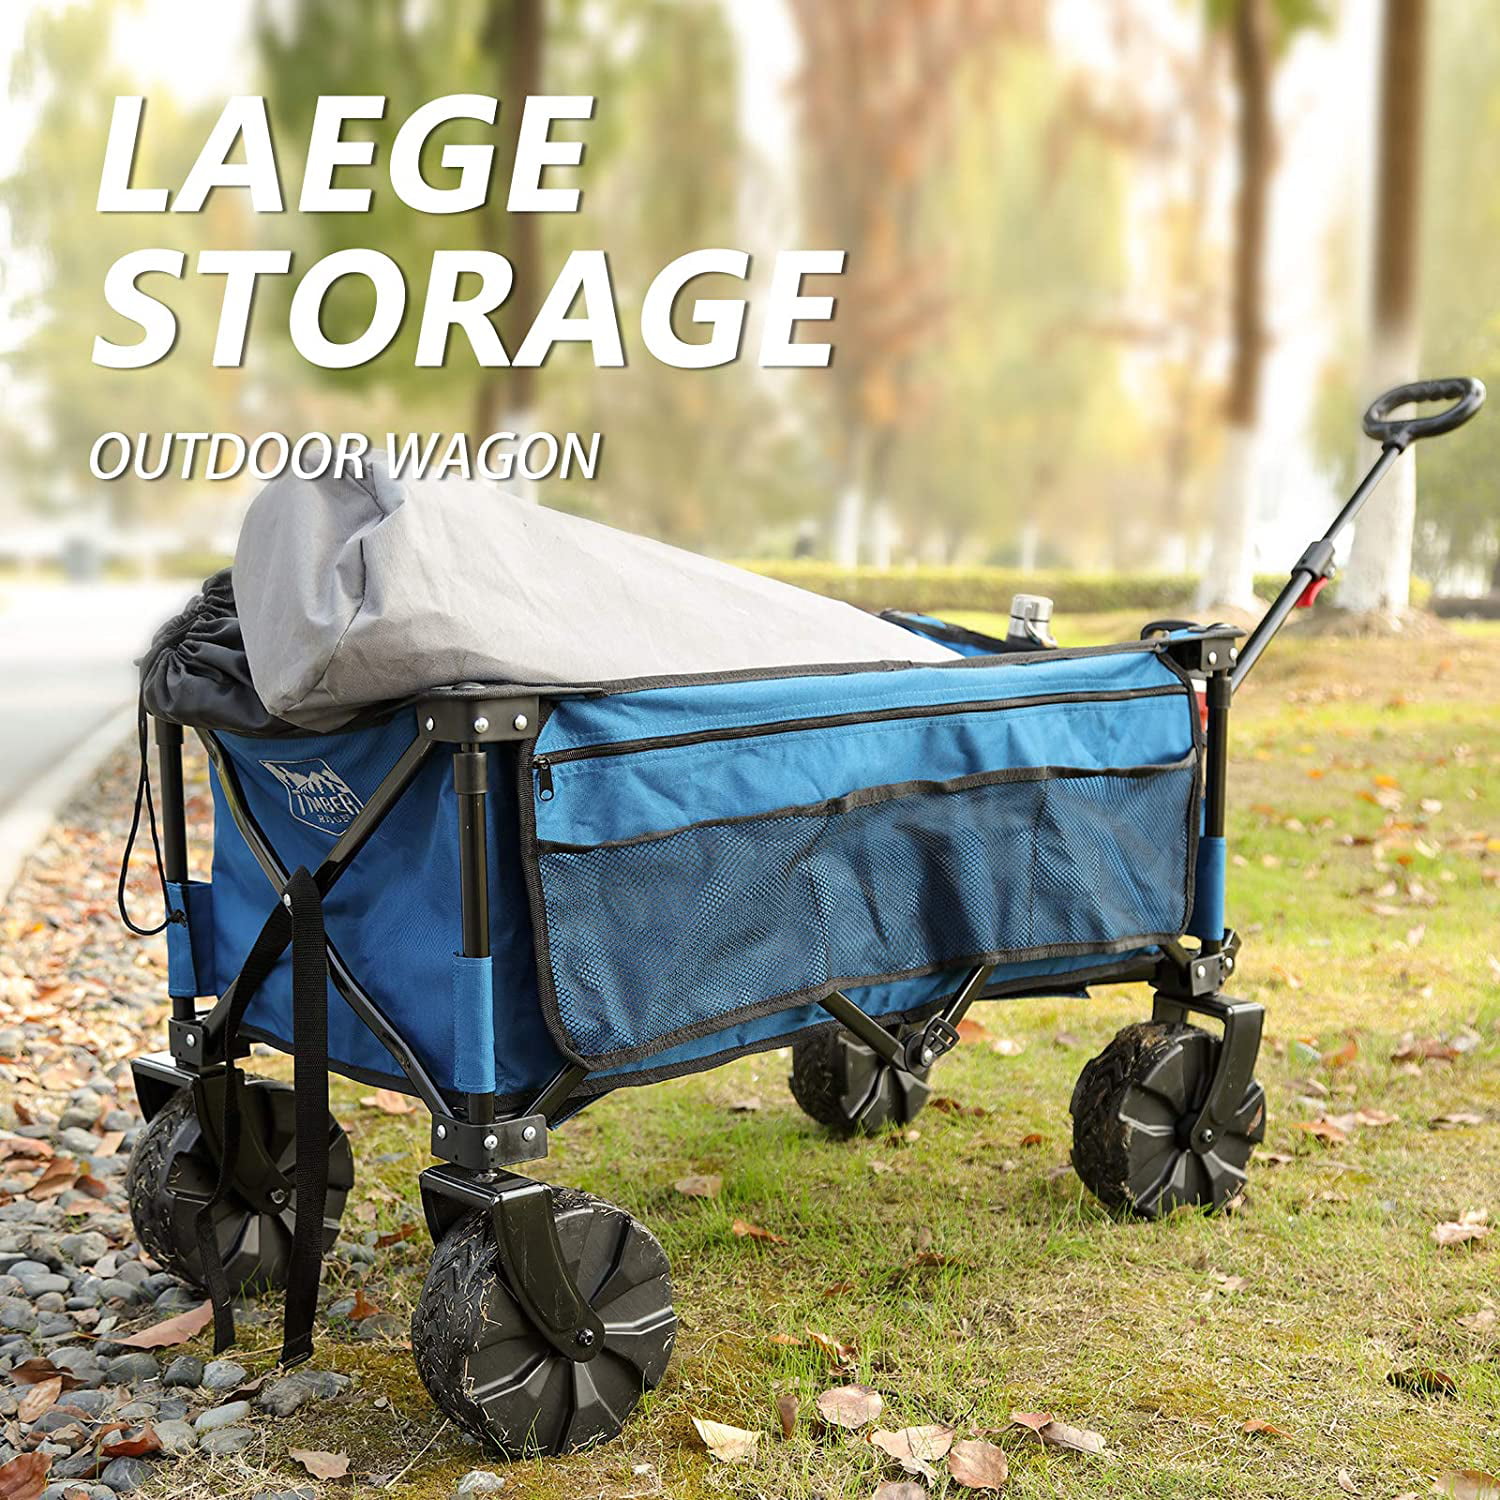 Timber Ridge Folding Camping Wagon Cart Collapsible Sturdy Steel Frame Garden Beach Large Size Heavy Duty 